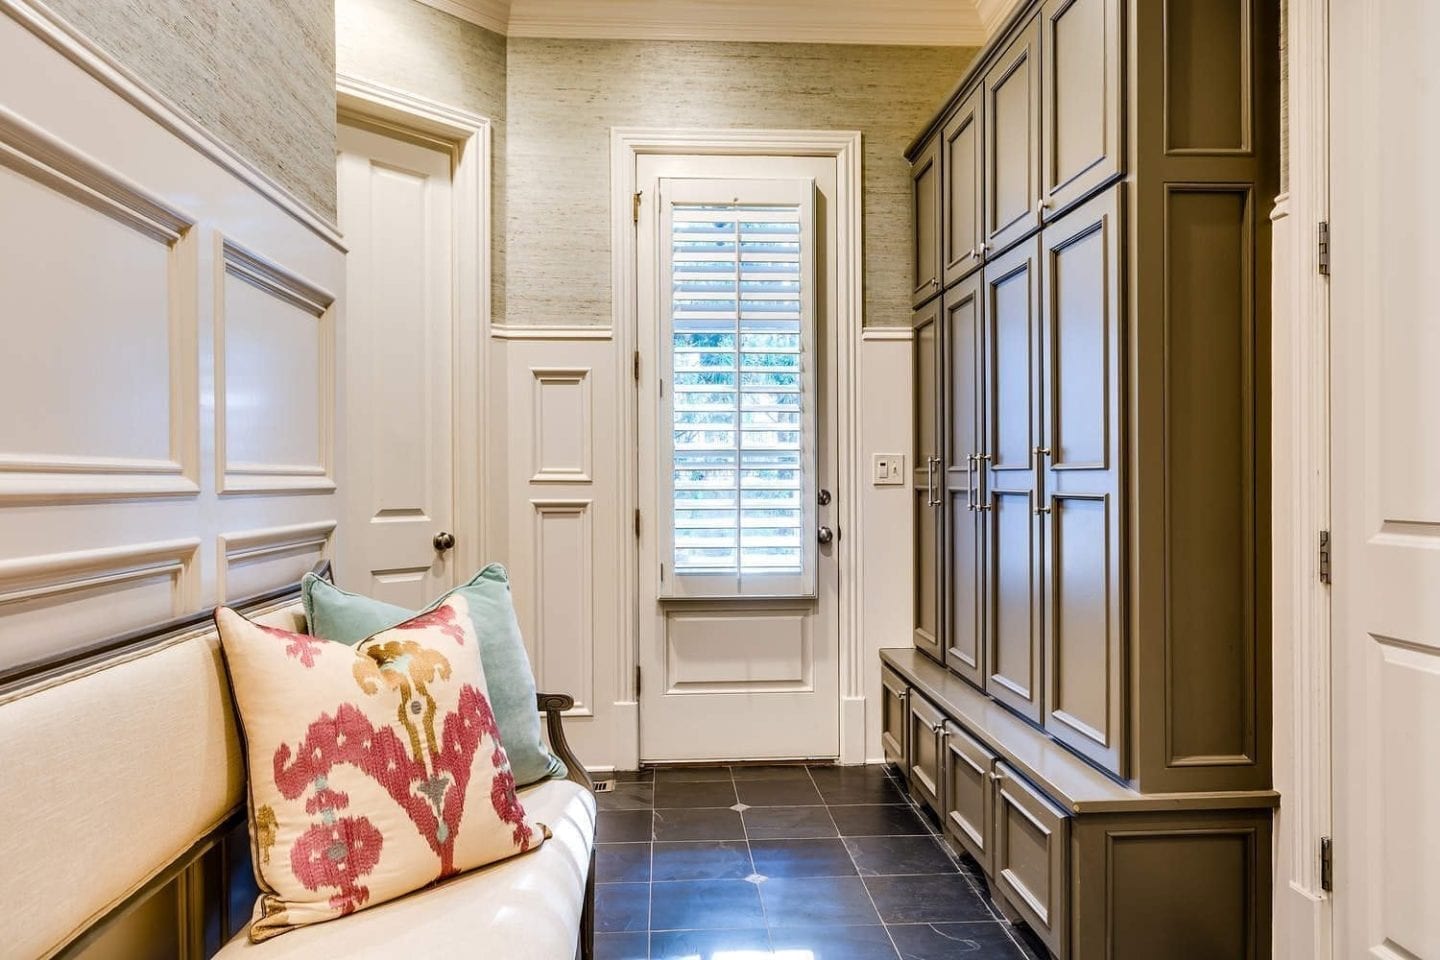 Mudroom design and mudroom built ins for easy storage for backpacks and shoes.